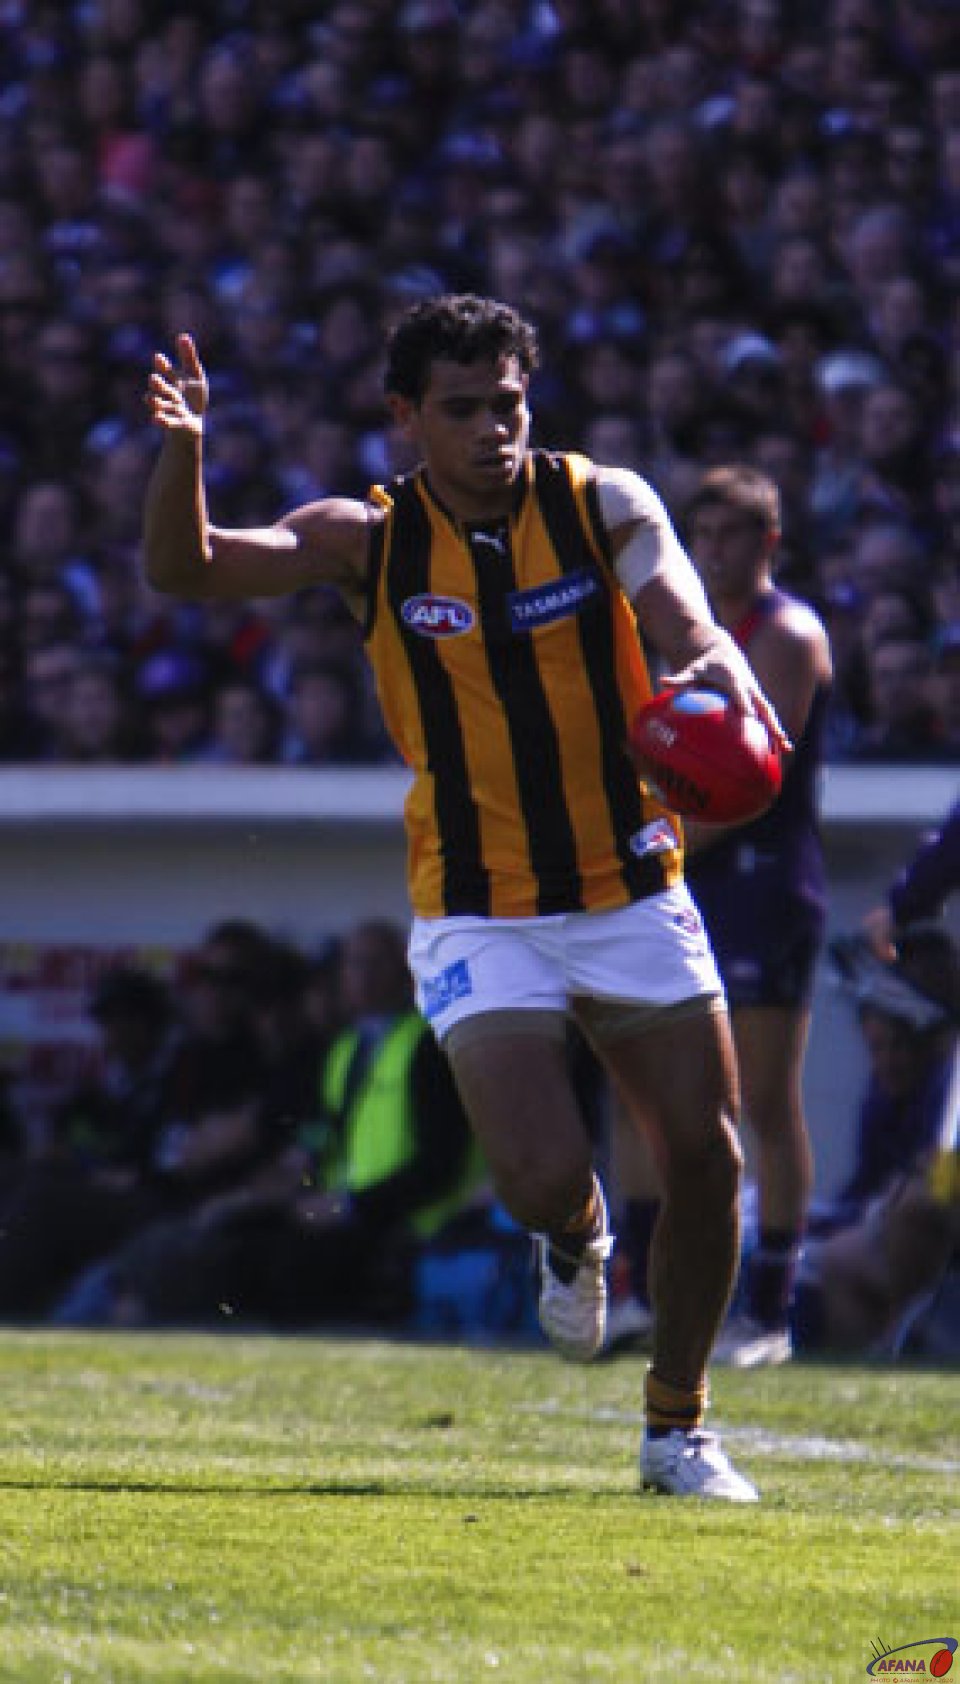 Rioli On The Wing